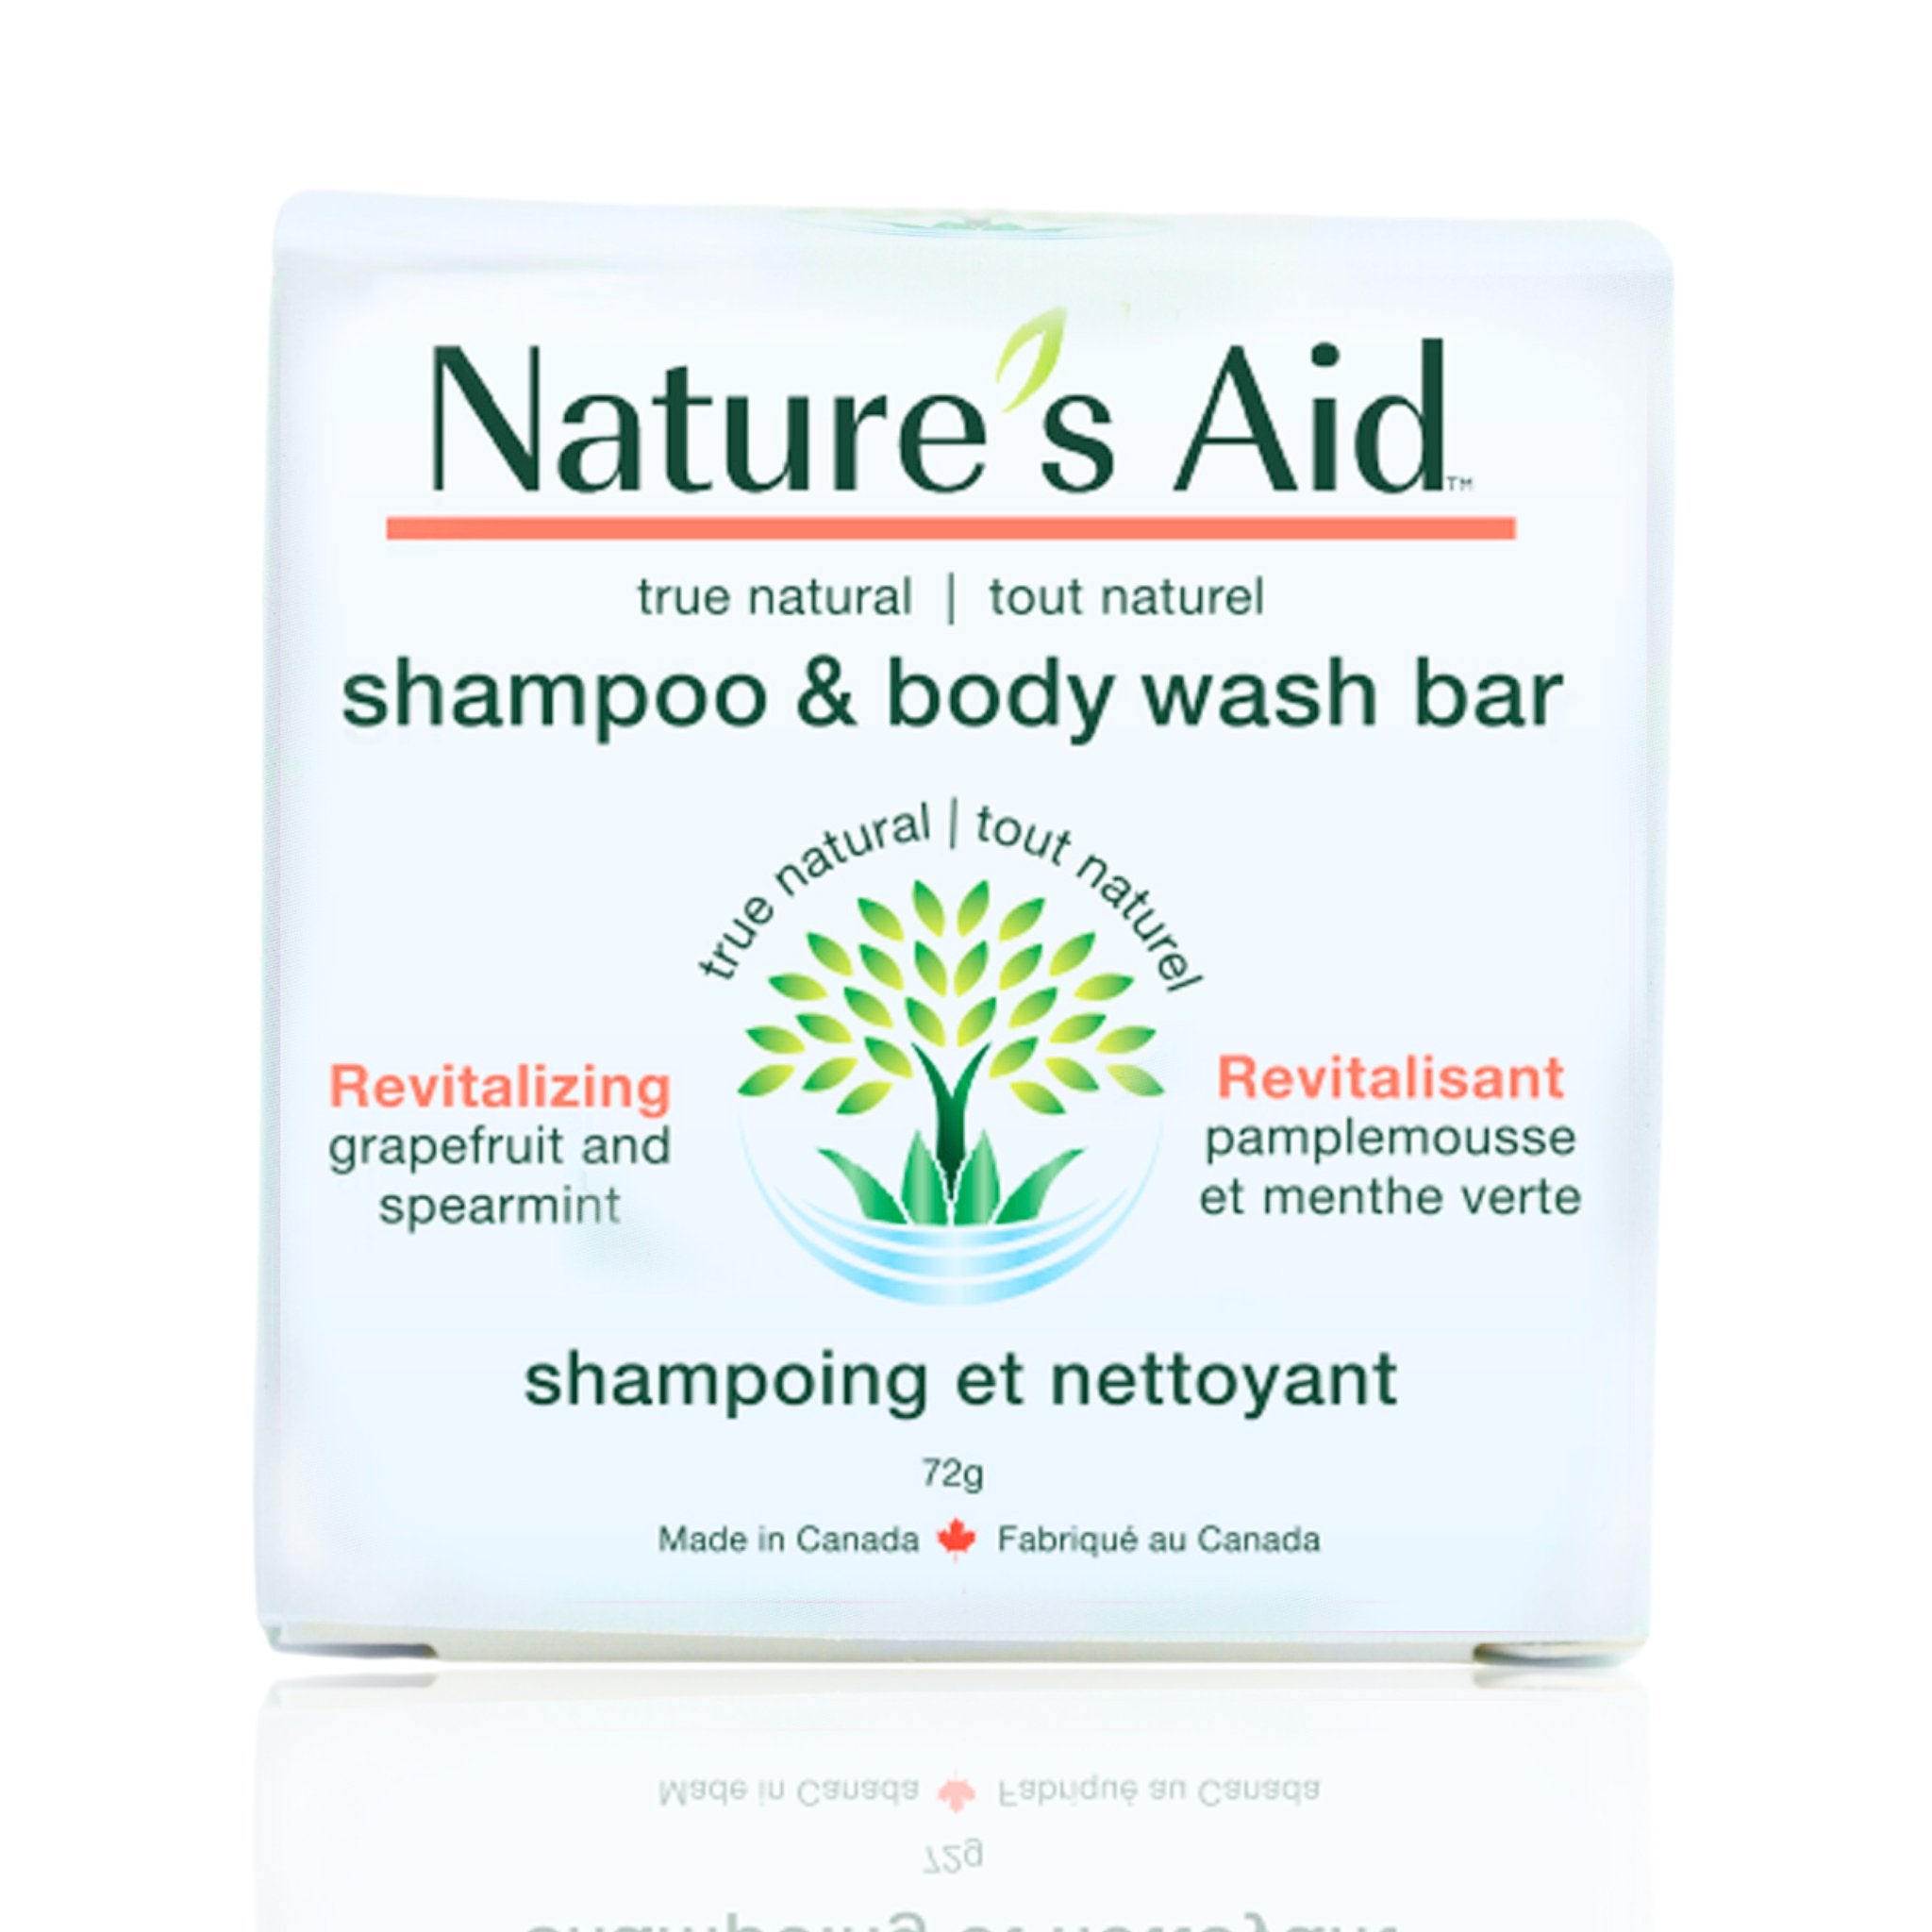 2in1 Shampoo and Wash | 72g Solid Bars - Nature's Aid, ecofriendly, natural ingredients